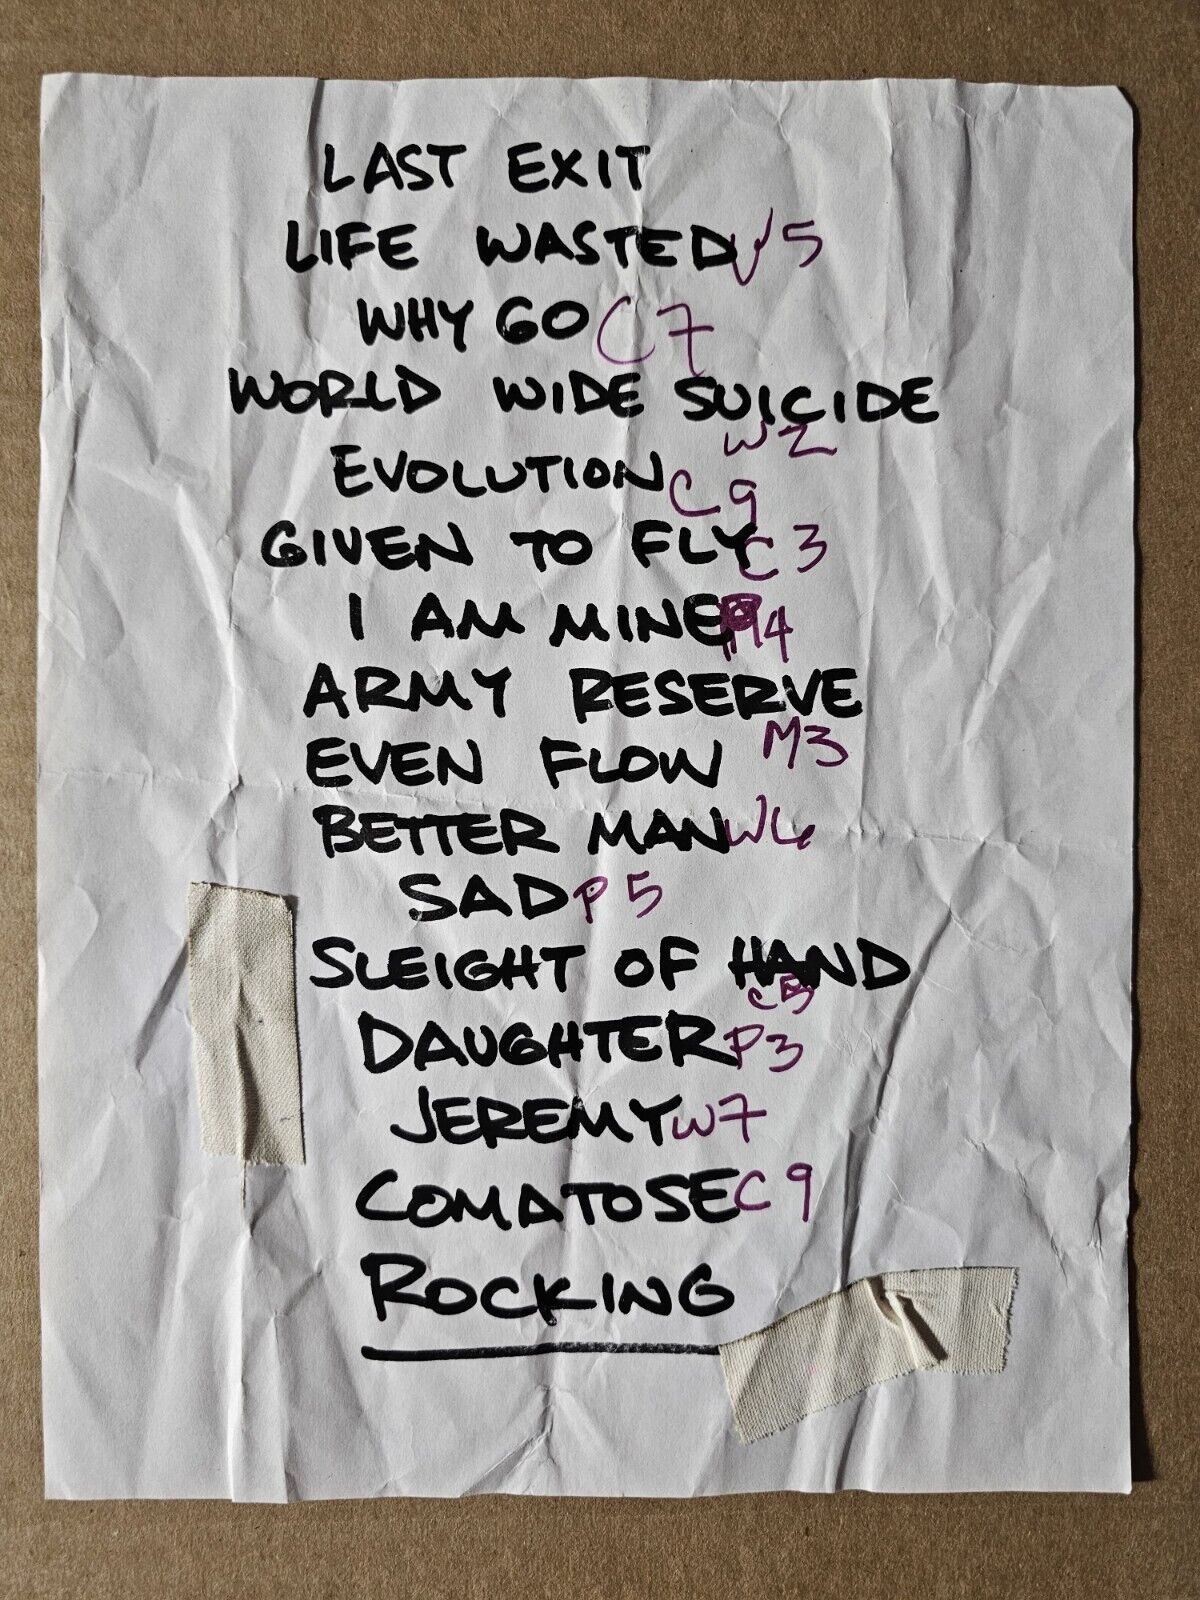 Pearl Jam Original Authentic Setlist With Code Next to Songs See Pics